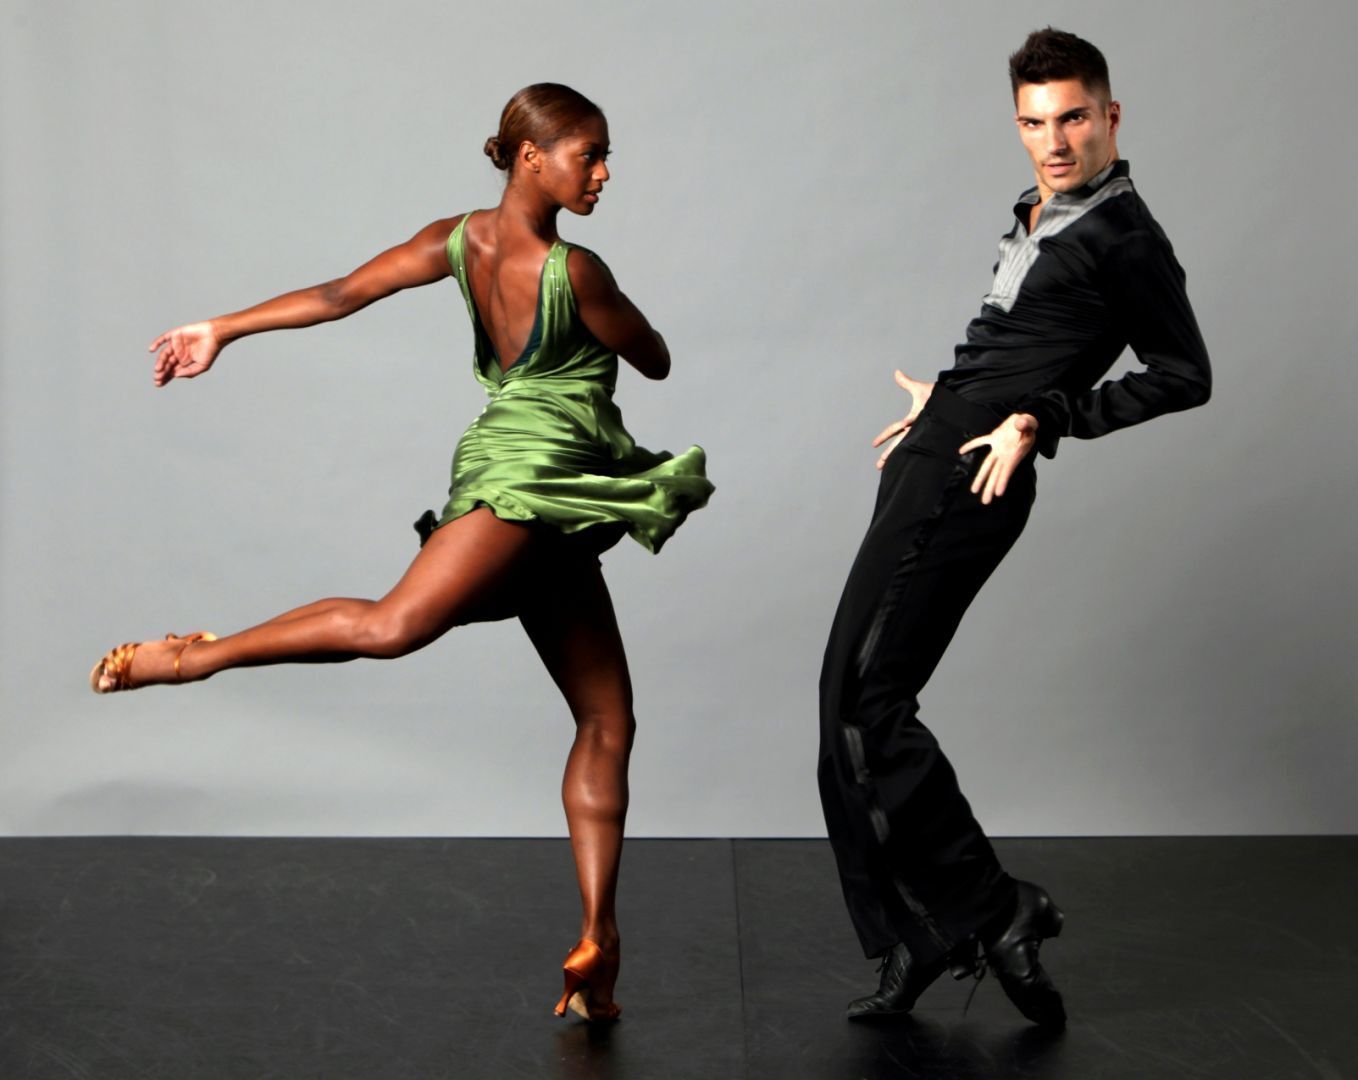 Ballroom dance Free Stock Photos, Images, and Pictures of Ballroom dance